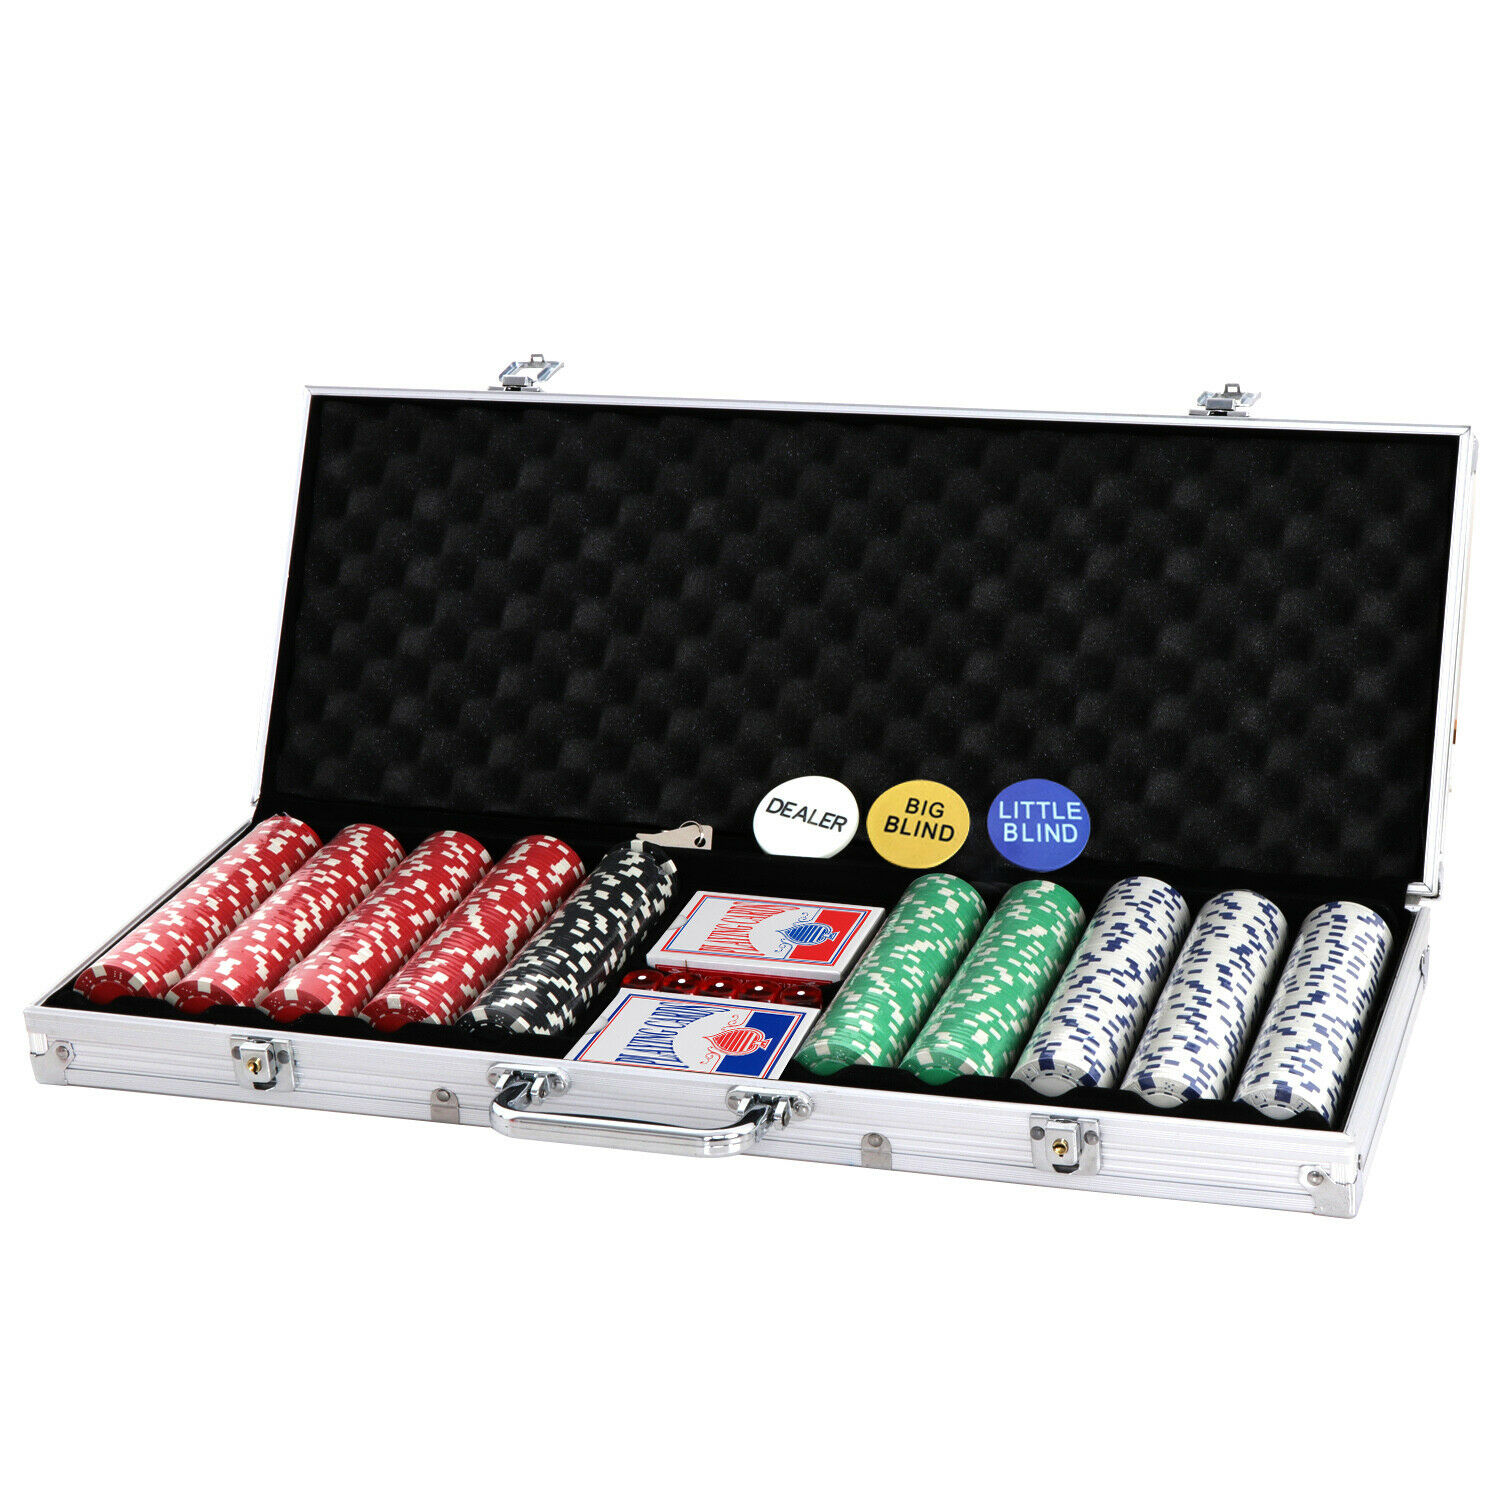 ZENY 500 Poker Chip Set 11.5 Gram Dice Style Aluminum Case, Cards, Dices, Blind Button - image 3 of 6